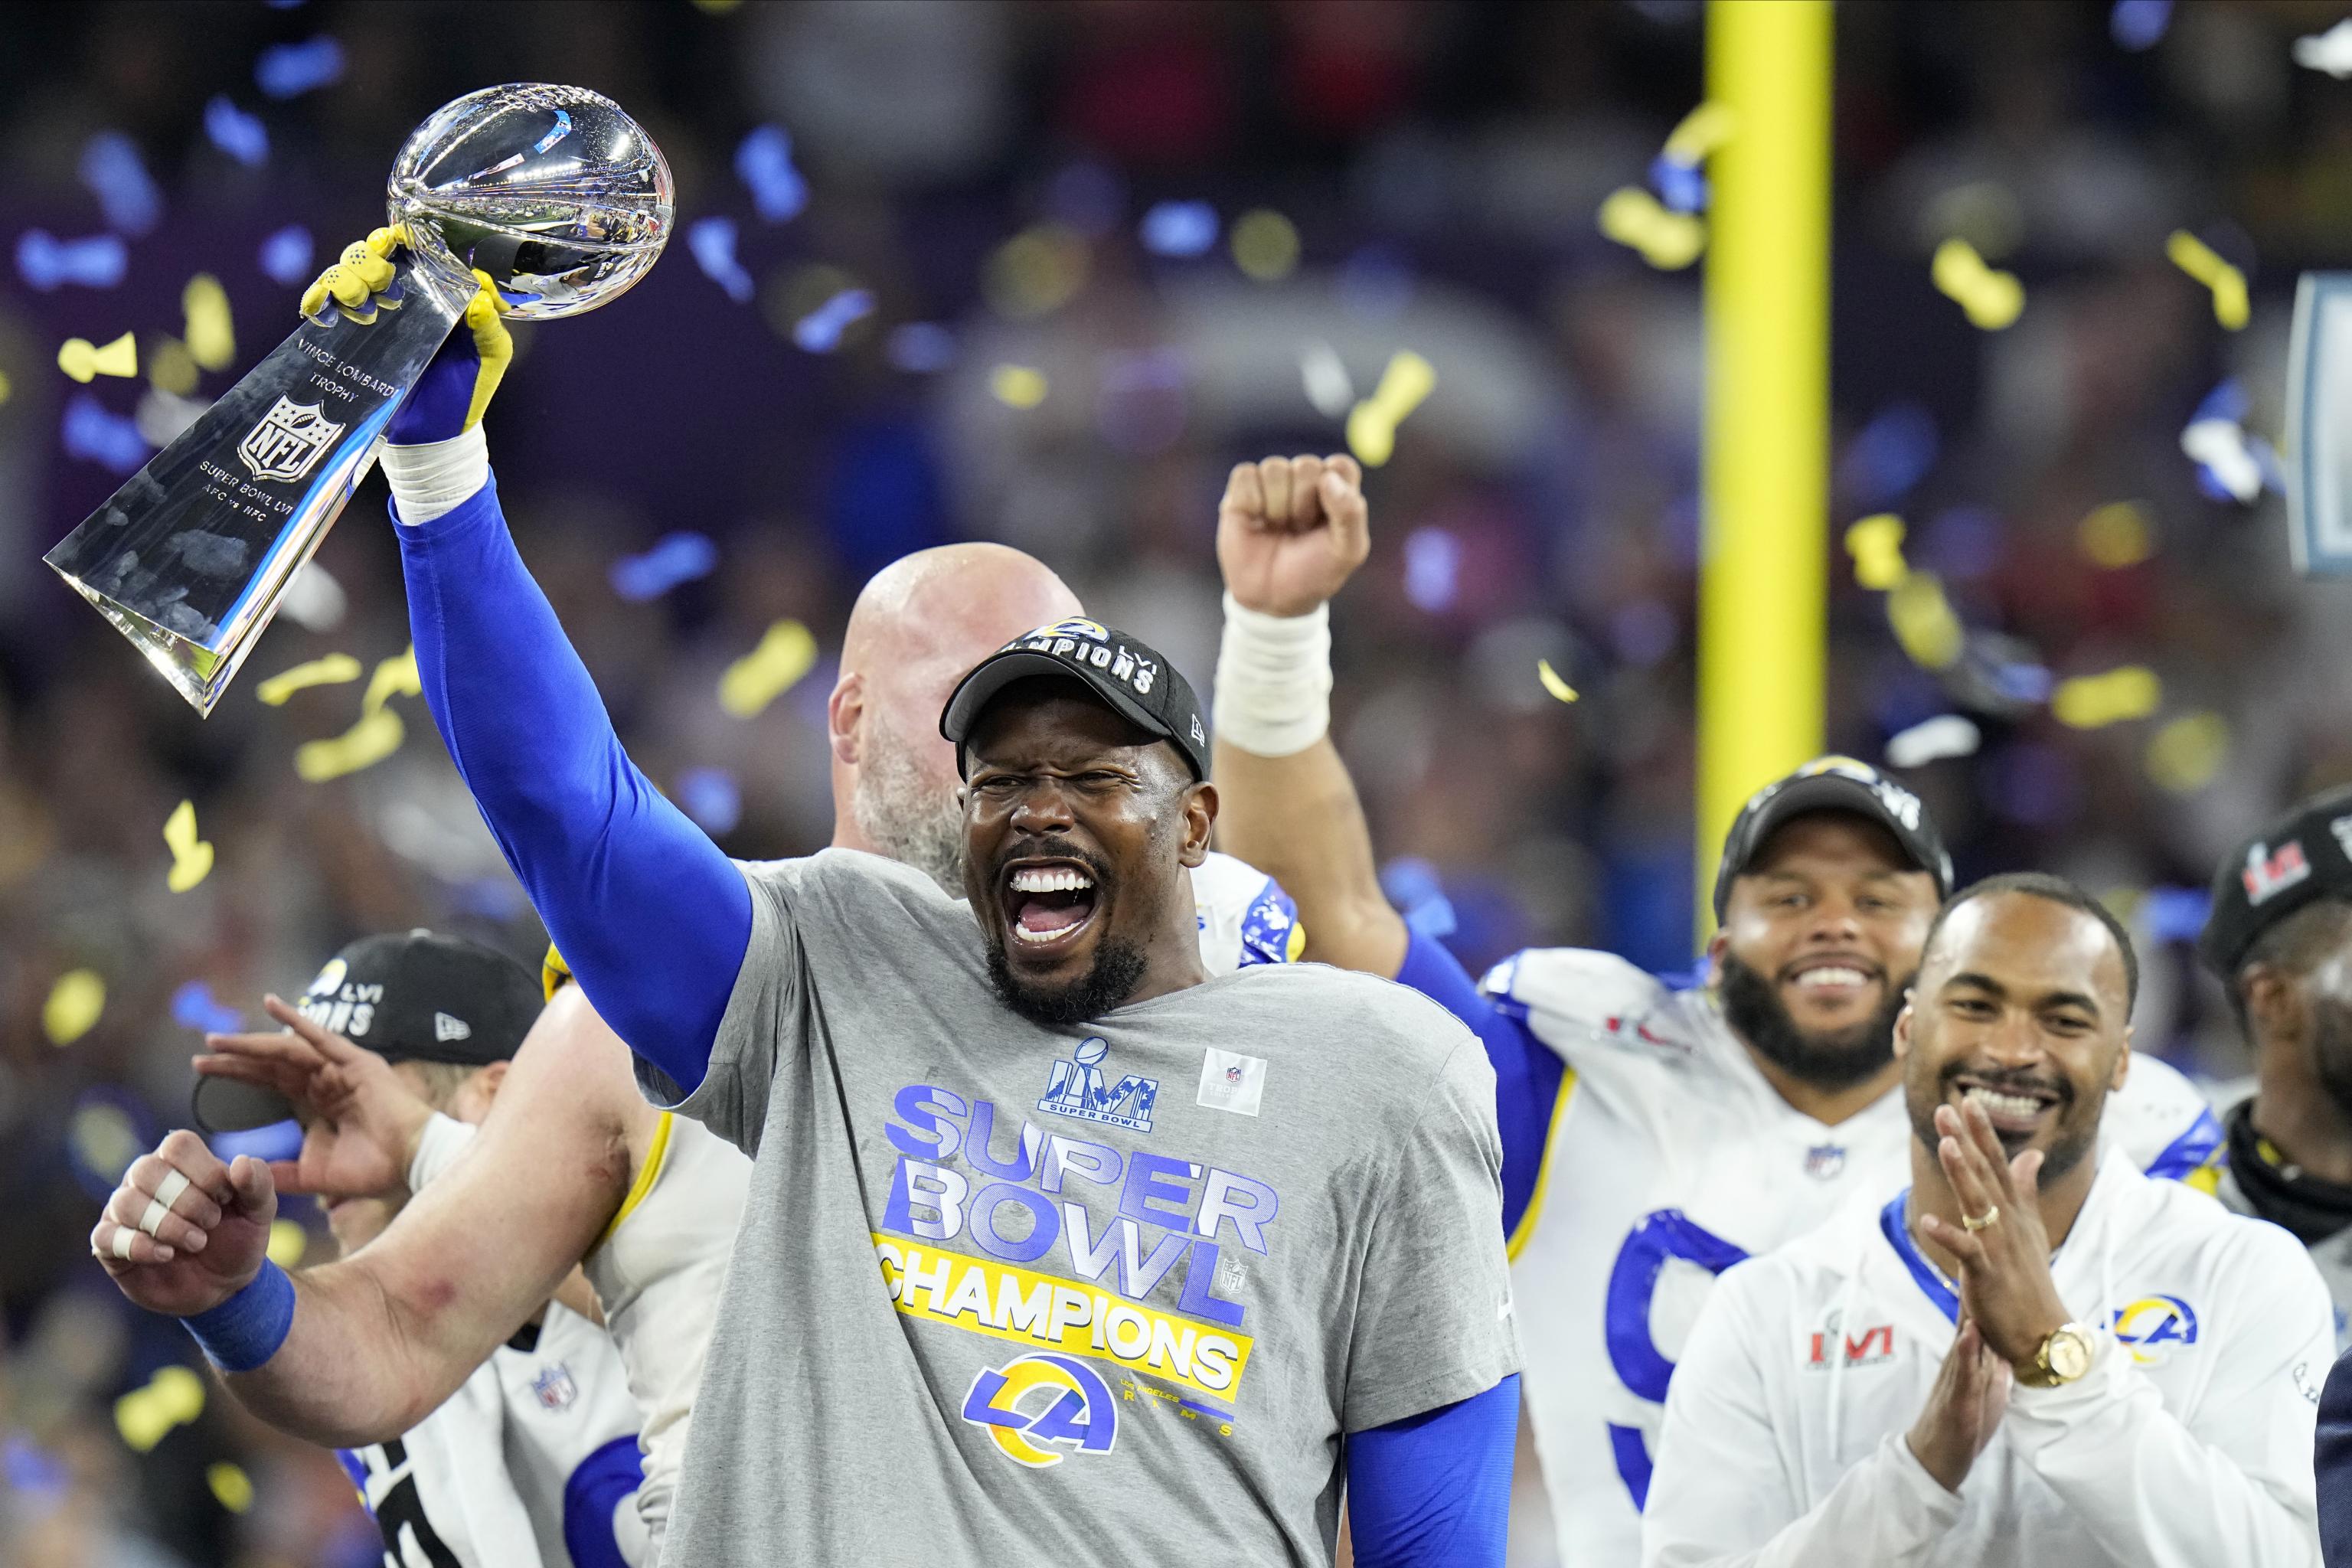 Rams Parade 2022: Date, Route, Expectations After Super Bowl Win